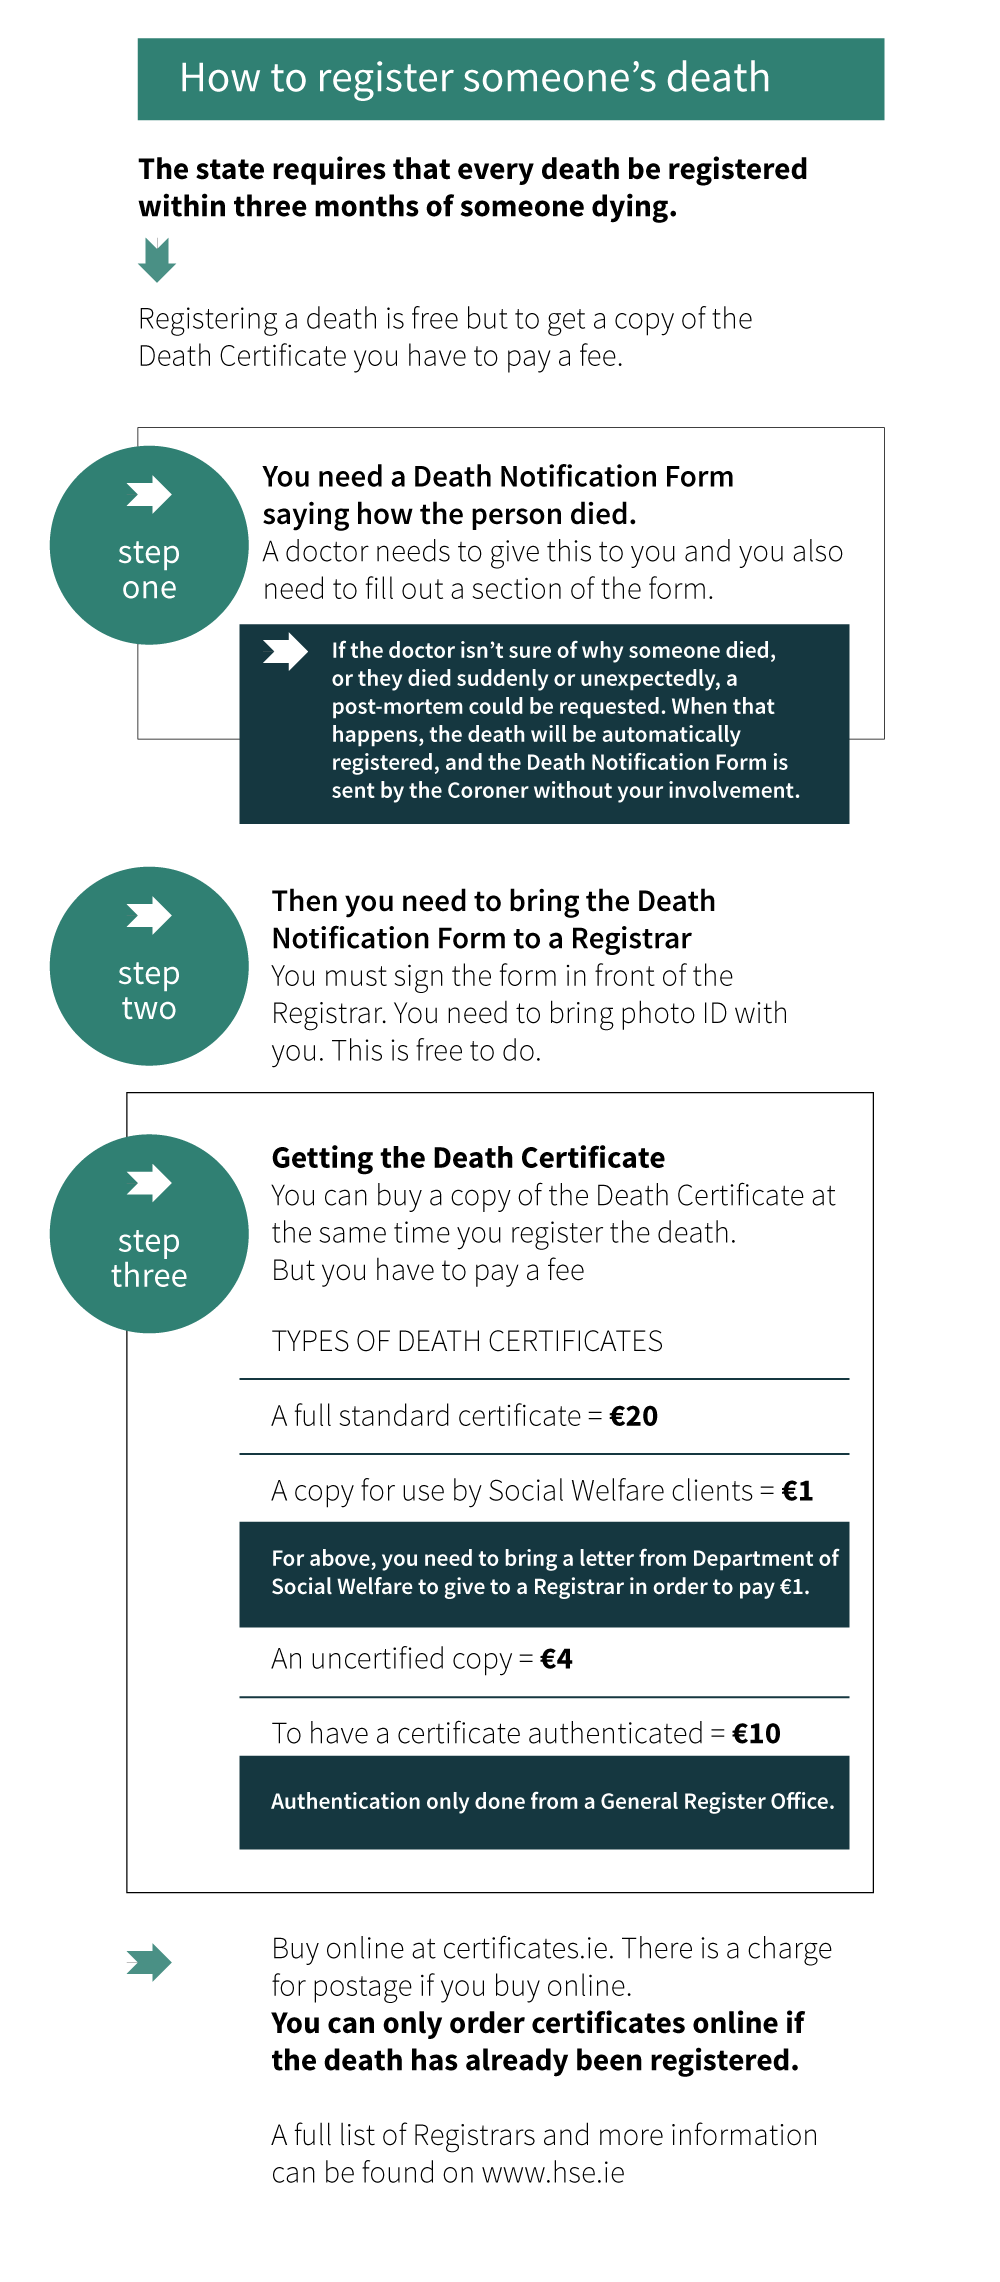 How to register a death